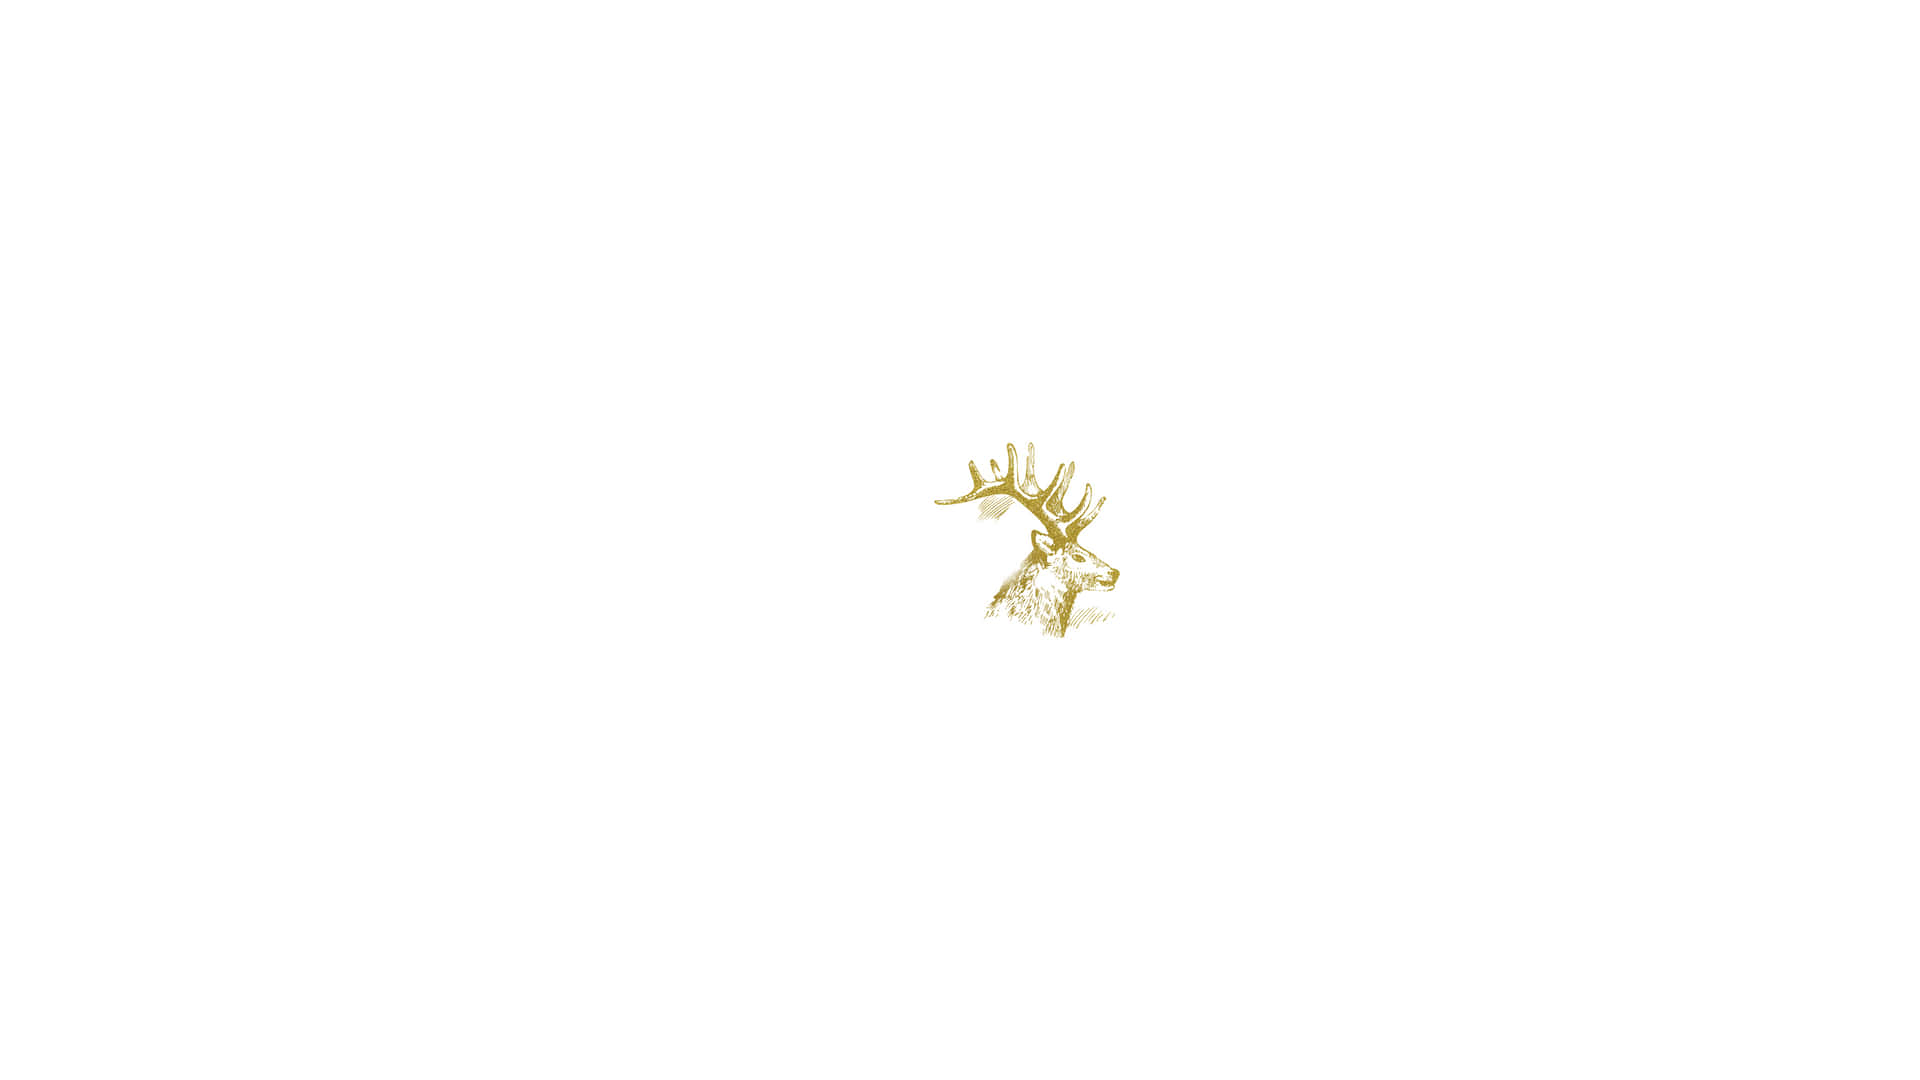 A Gold Deer Head On A White Background